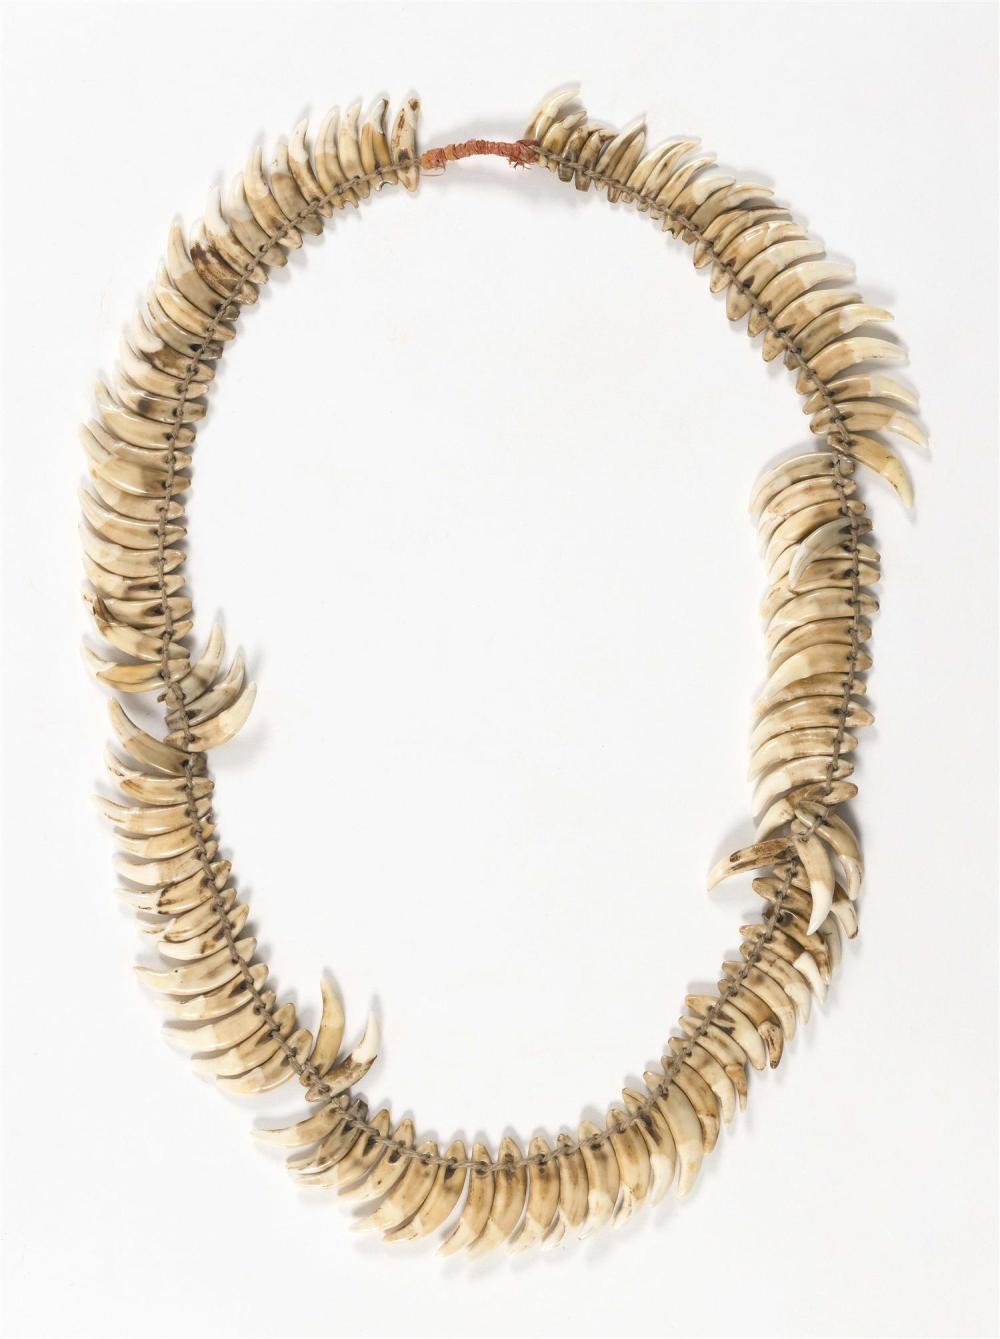 CEREMONIAL OR TROPHY TOOTH NECKLACE